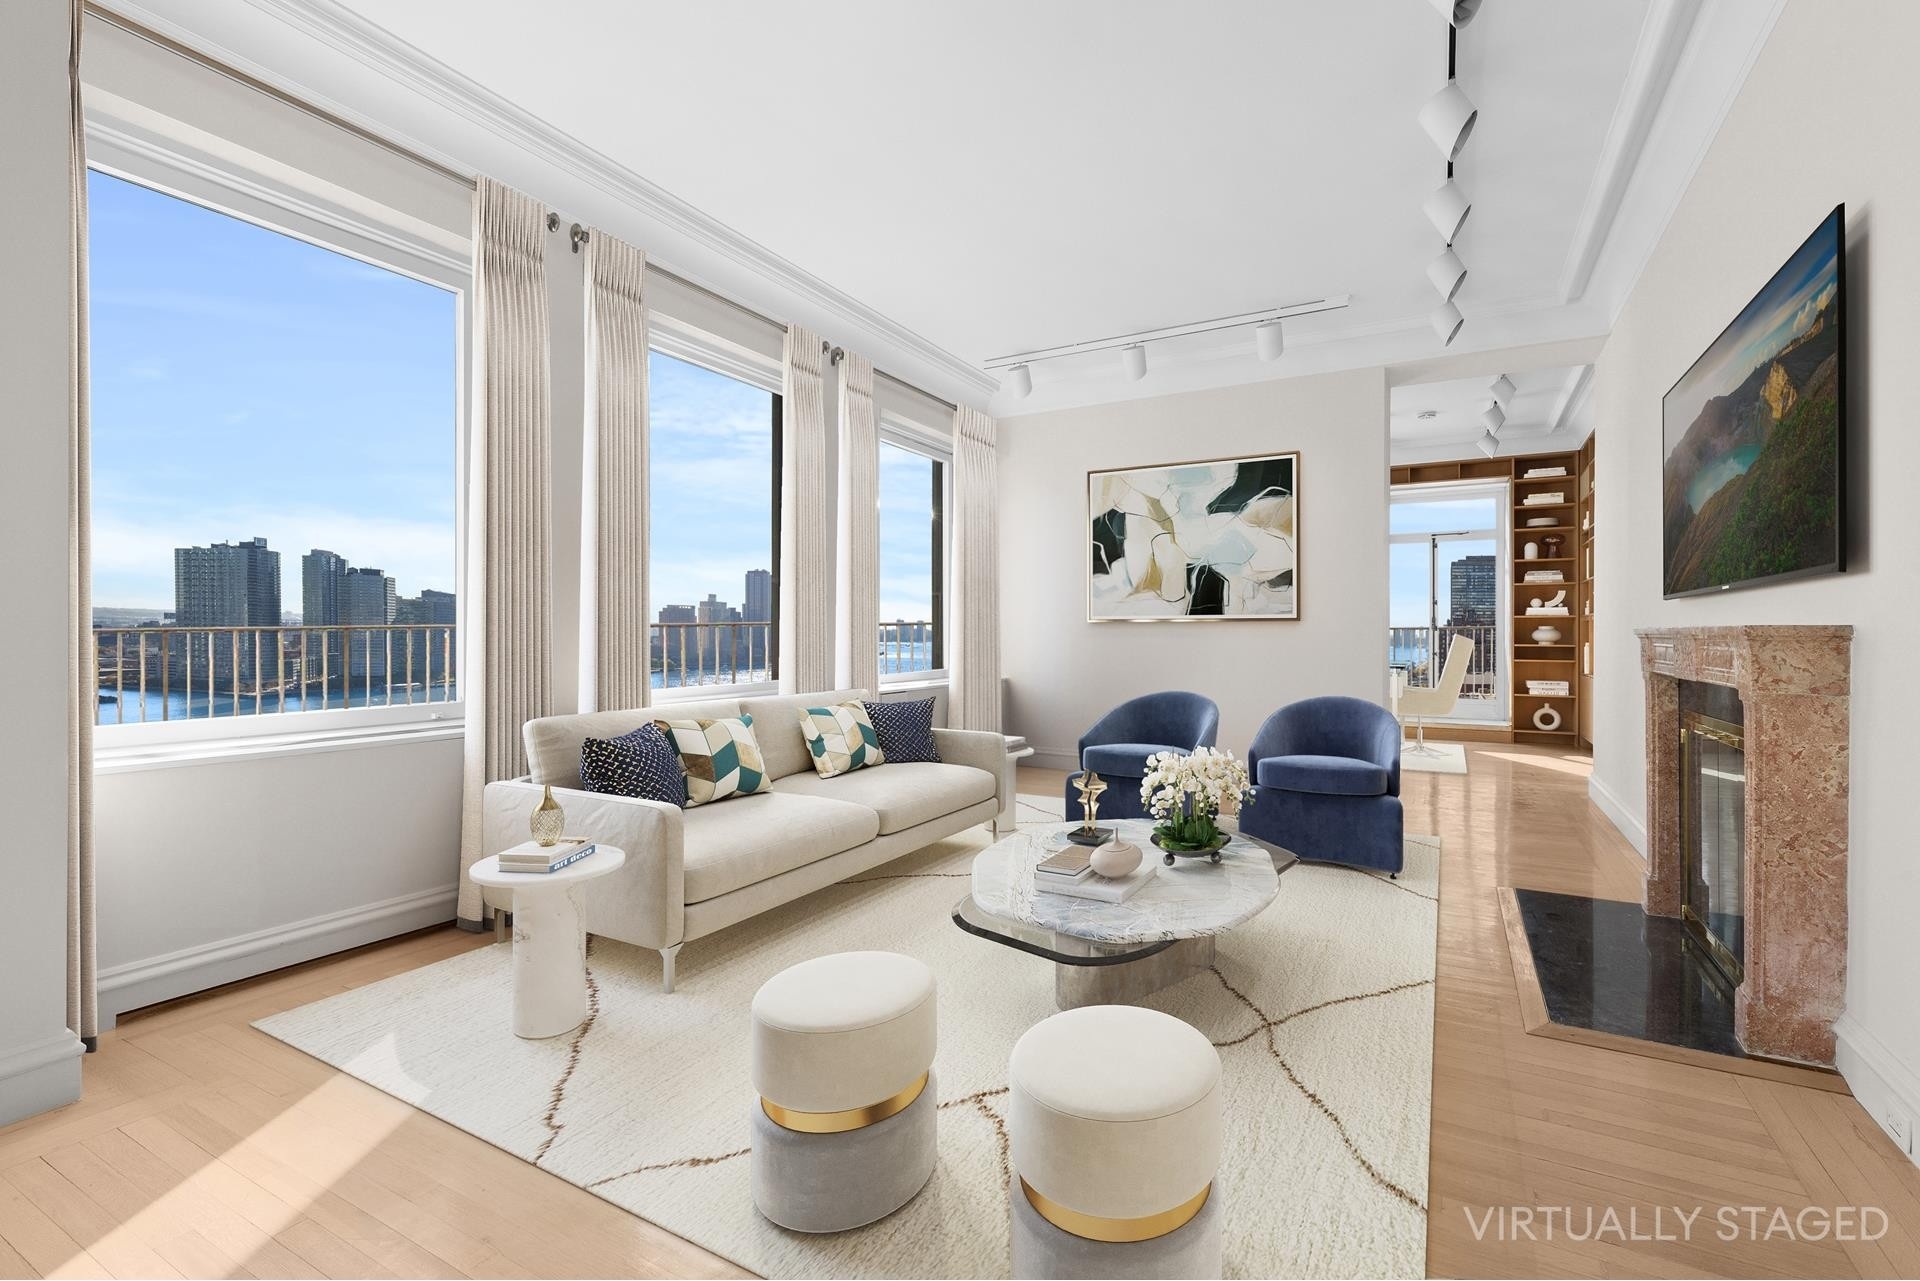 Property at RIVER HOUSE, 435 E 52ND ST, 15A Beekman, New York, NY 10022